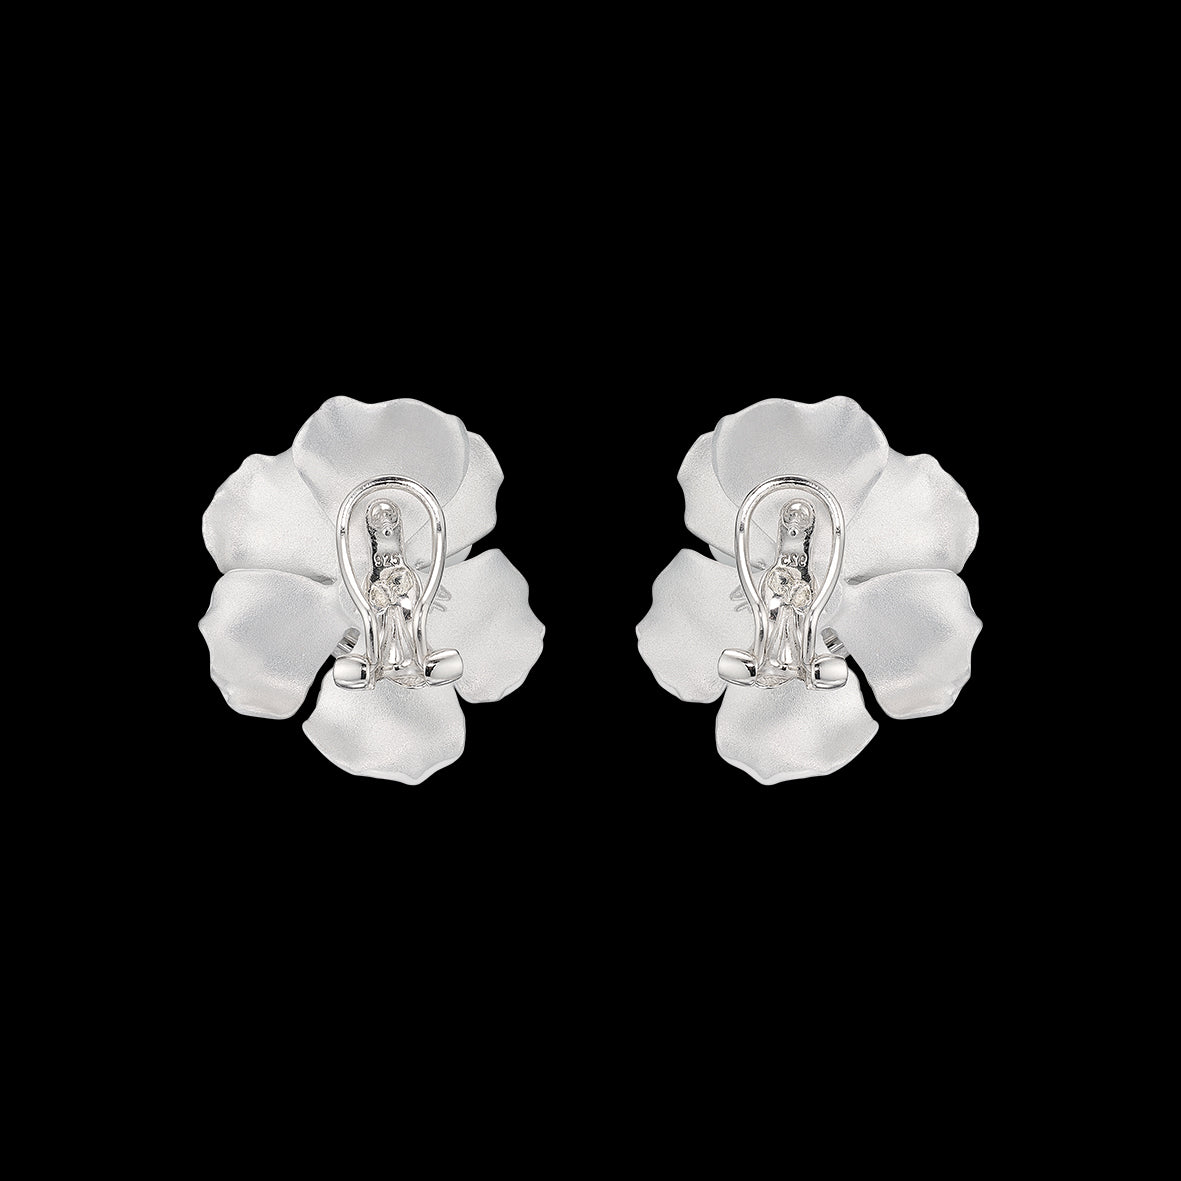 Snowflower Rose Studs, Earrings, Anabela Chan Joaillerie - Fine jewelry with laboratory grown and created gemstones hand-crafted in the United Kingdom. Anabela Chan Joaillerie is the first fine jewellery brand in the world to champion laboratory-grown and created gemstones with high jewellery design, artisanal craftsmanship and a focus on ethical and sustainable innovations.